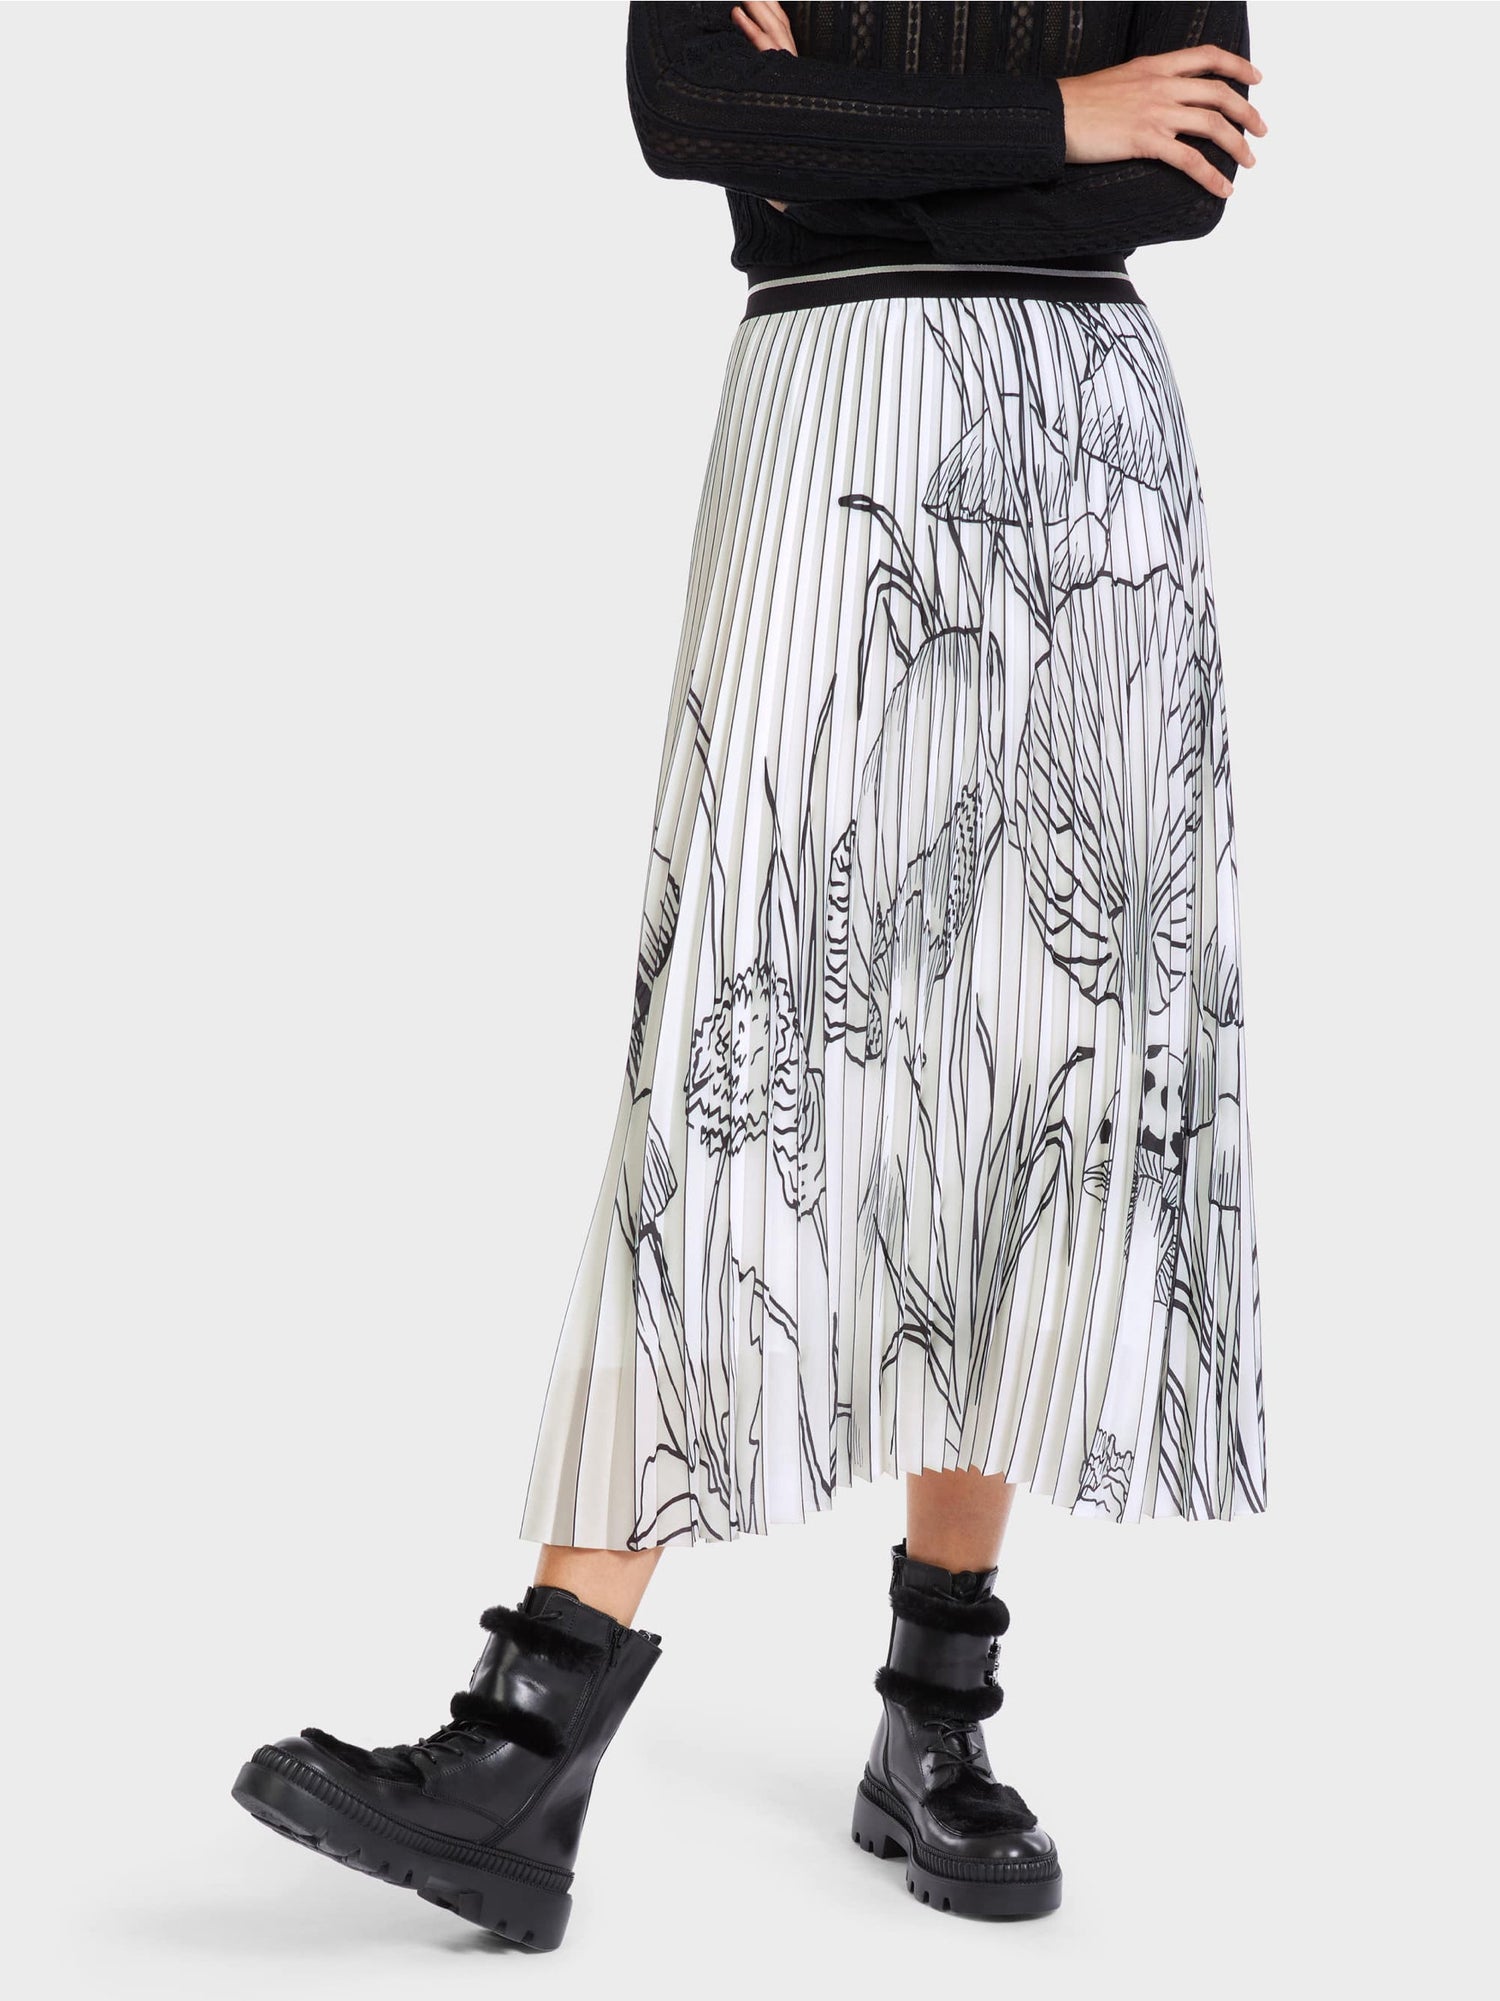 Pleated Rethink Together Print Skirt_VC 71.20 W76_110_05